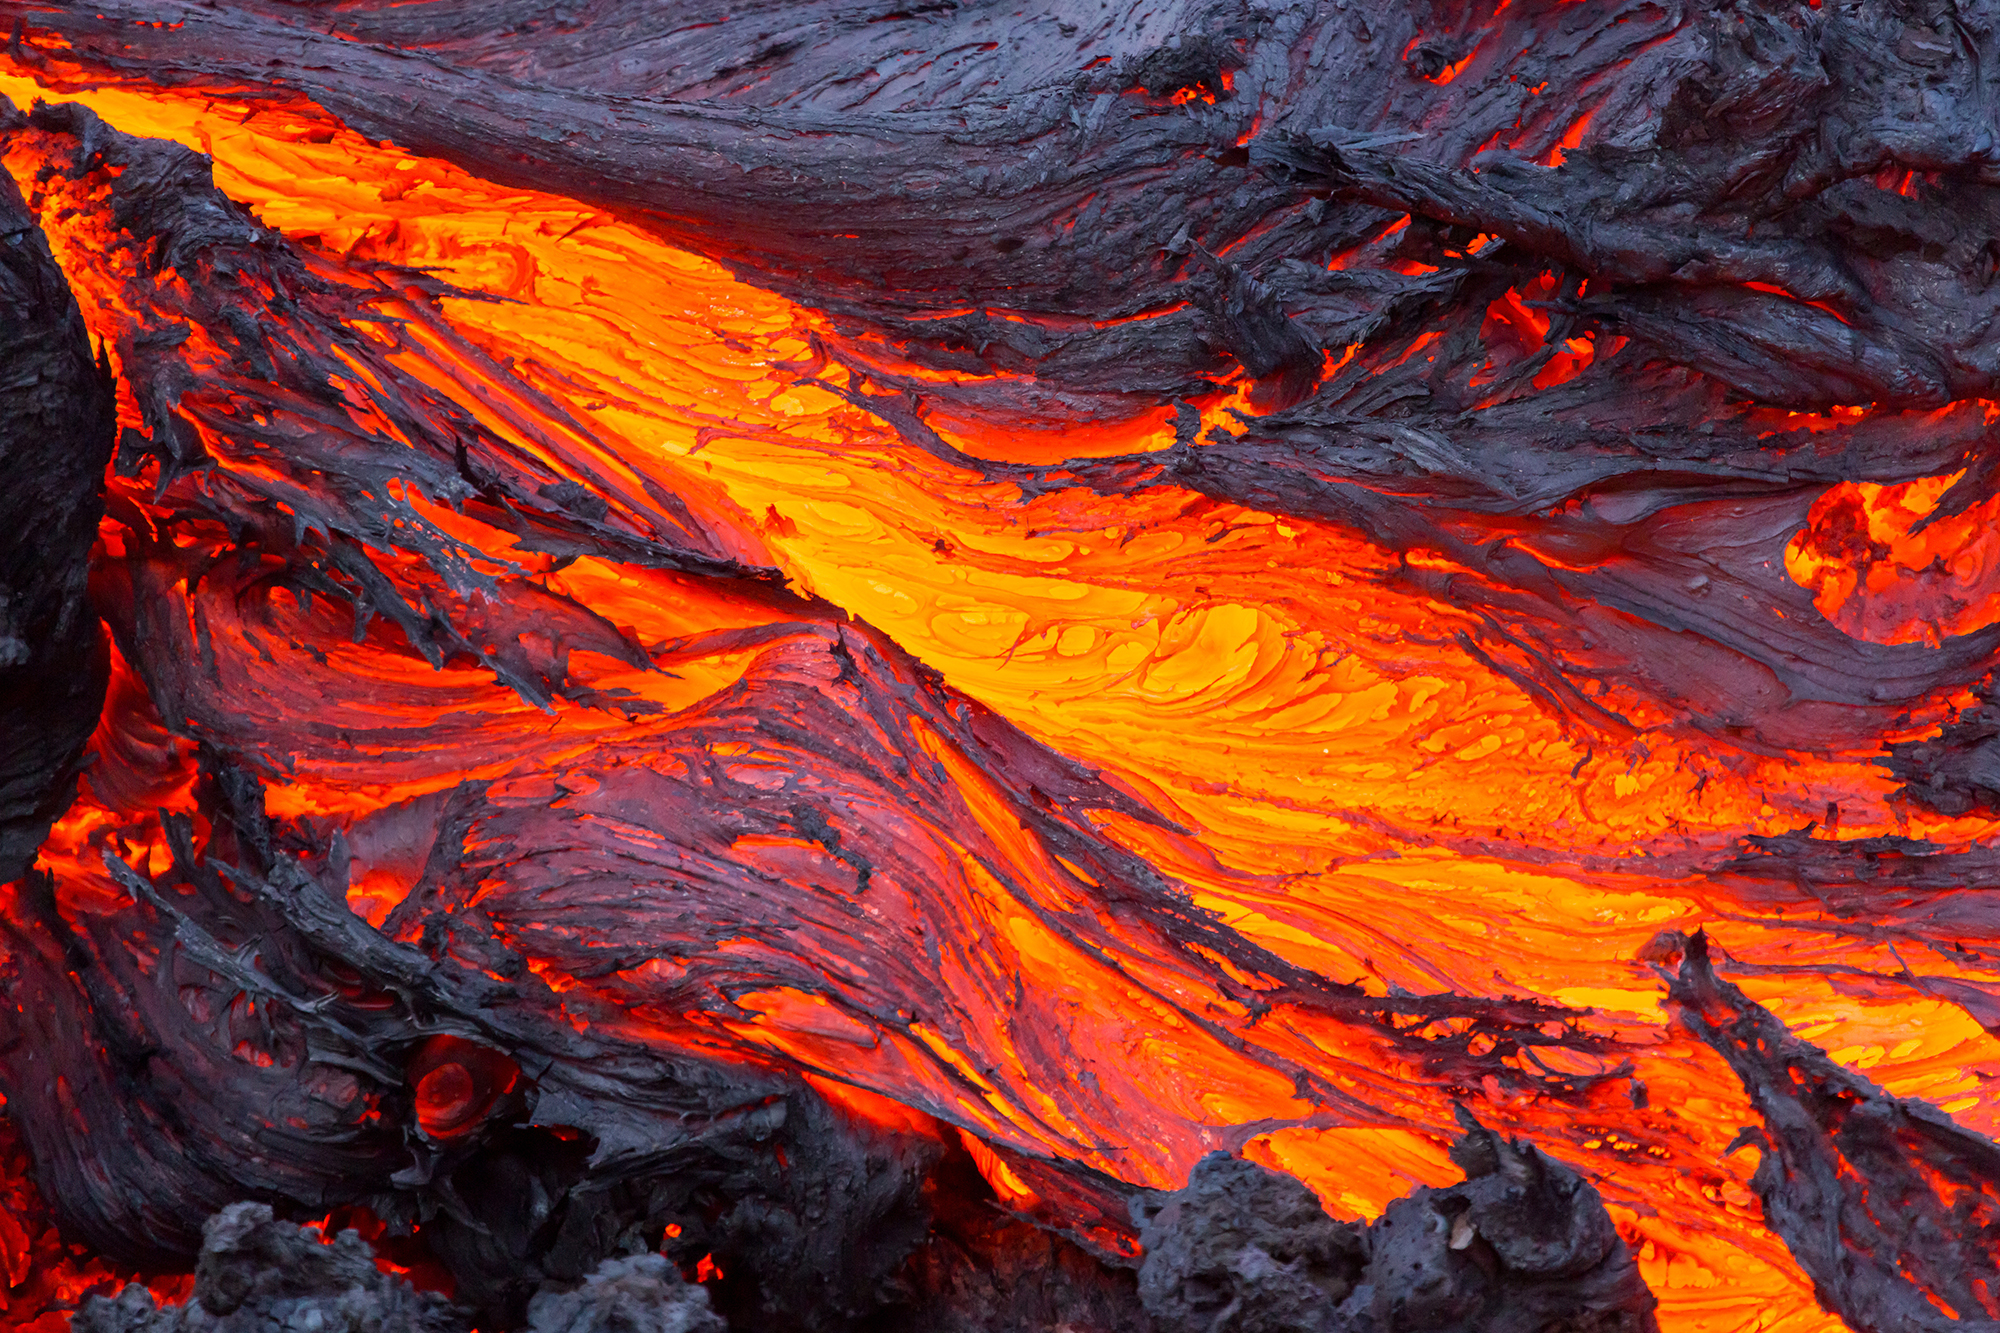 We Need a New Definition for Magma - Eos